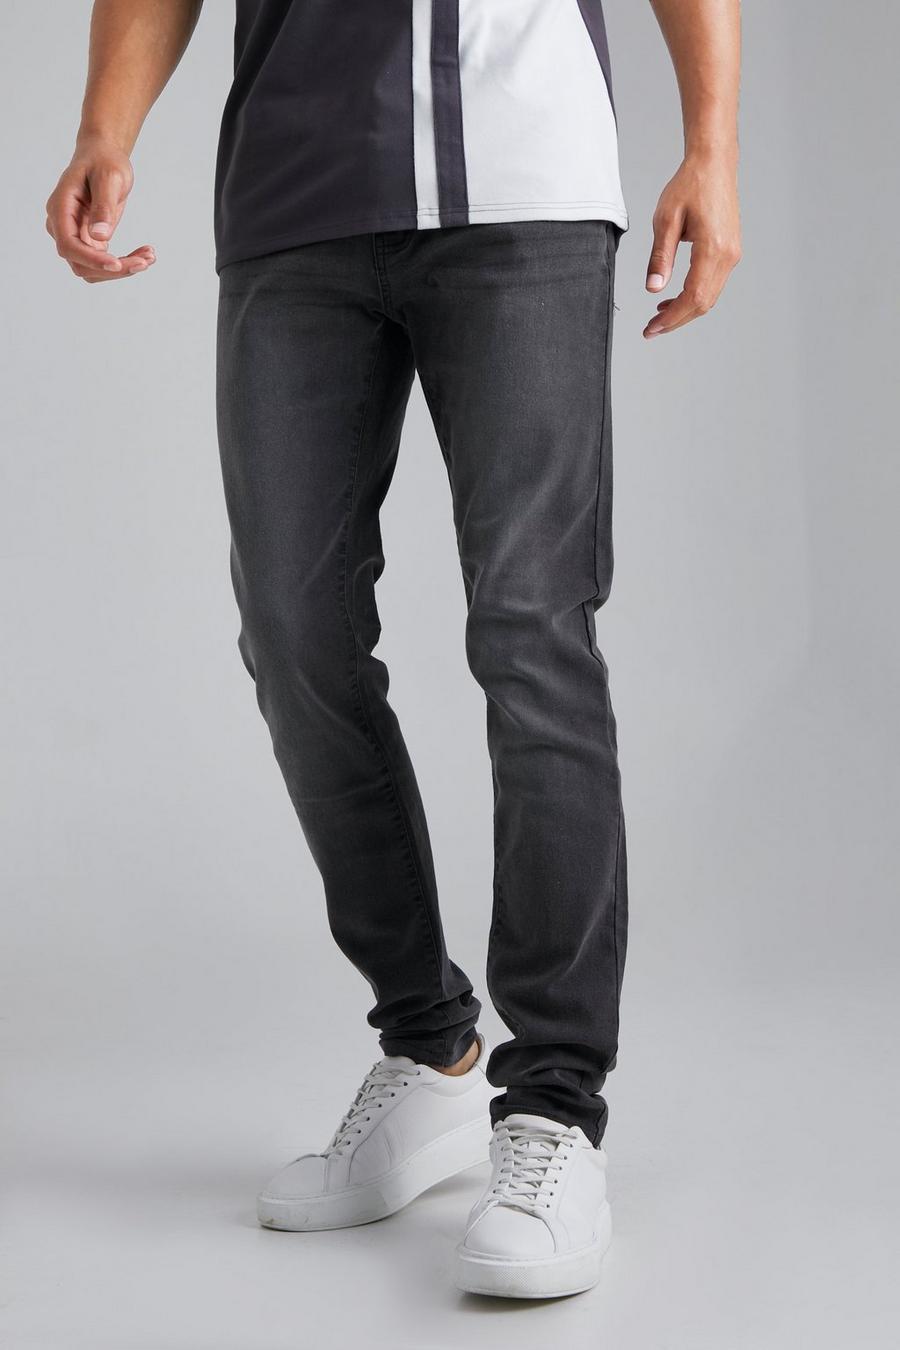 Tall Stretch Skinny-Jeans, Charcoal gris